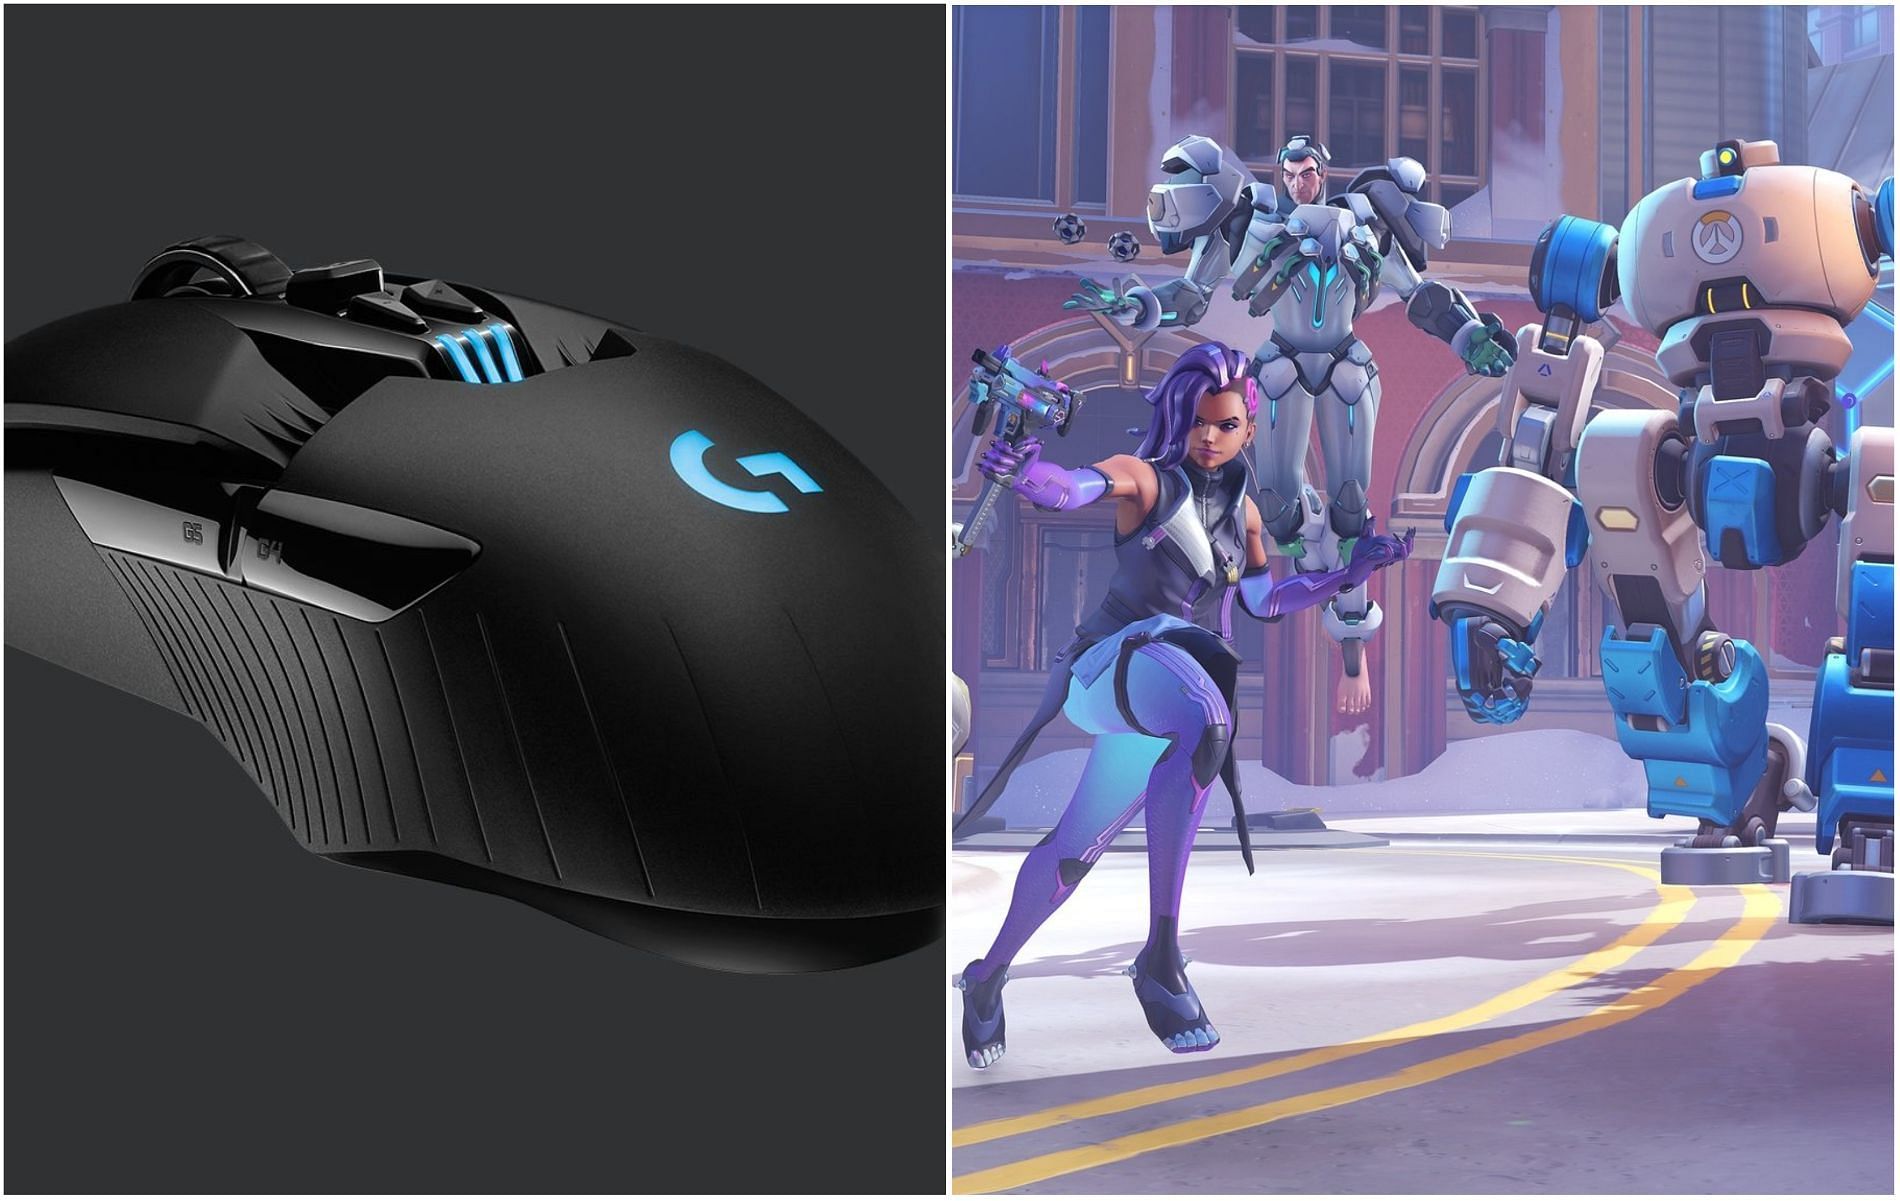 Overwatch 2 is more exhilarating and action-packed than ever (Image via Logitech and Blizzard)